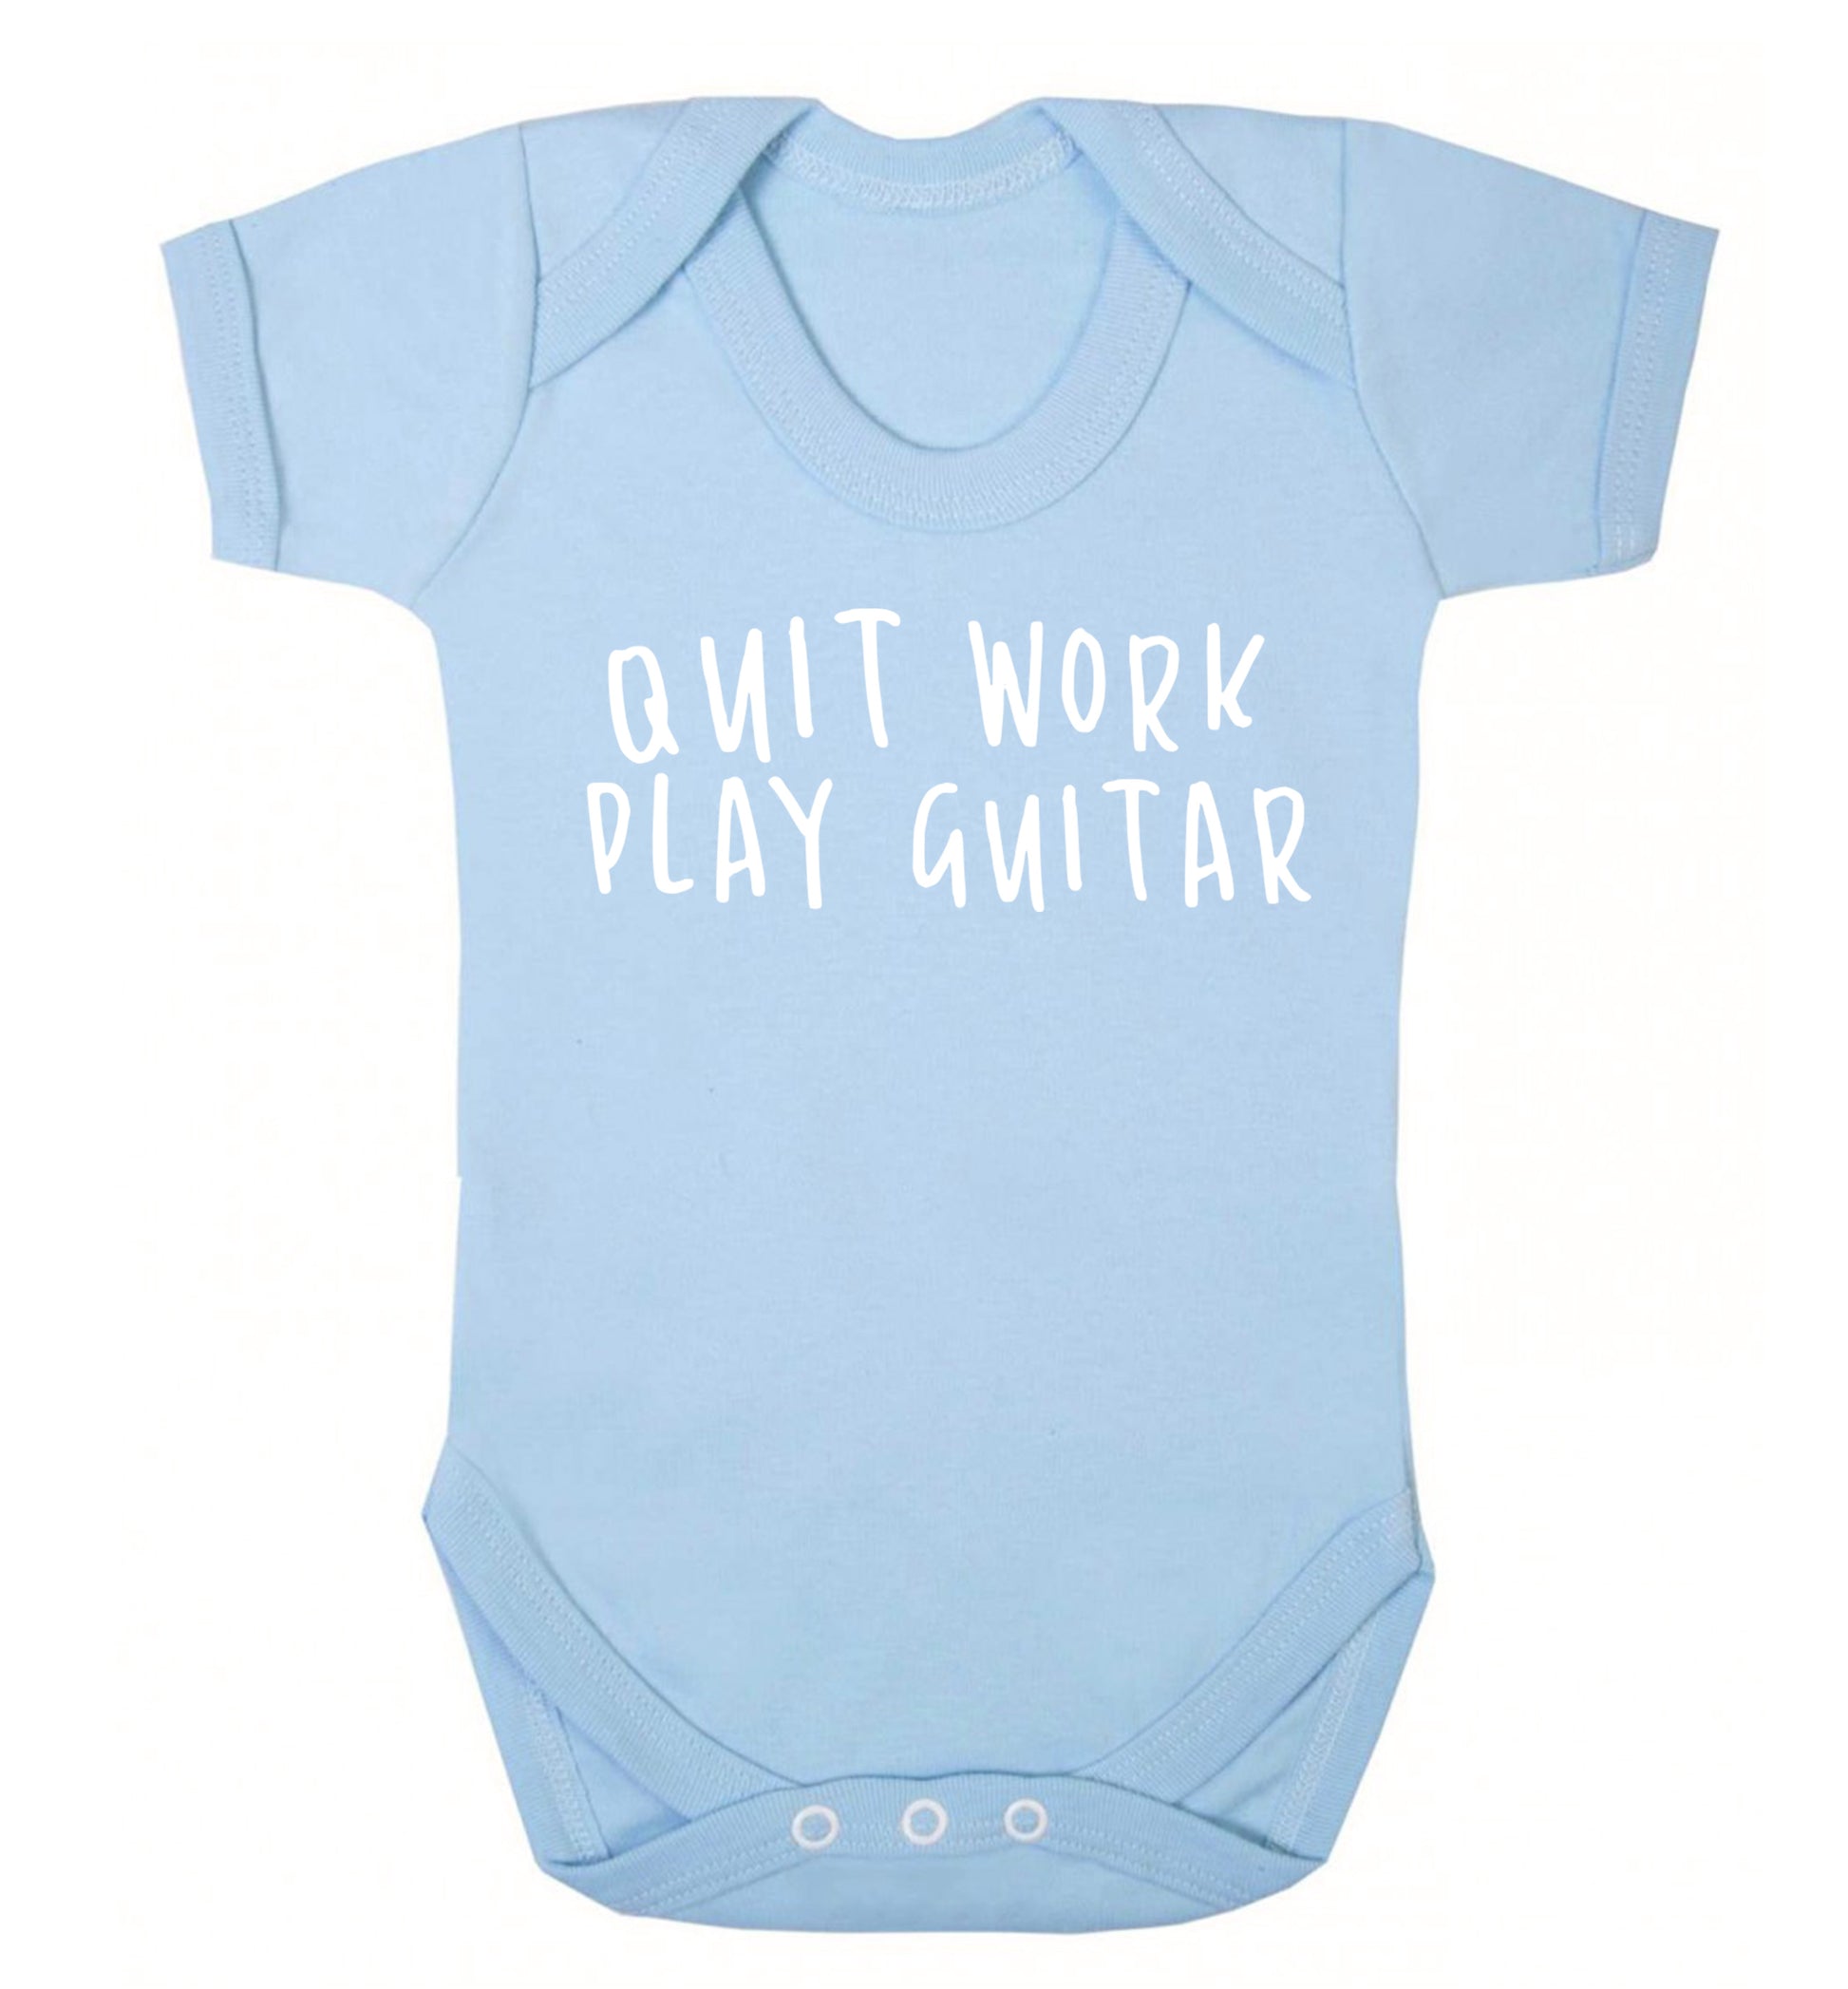 Quit work play guitar Baby Vest pale blue 18-24 months